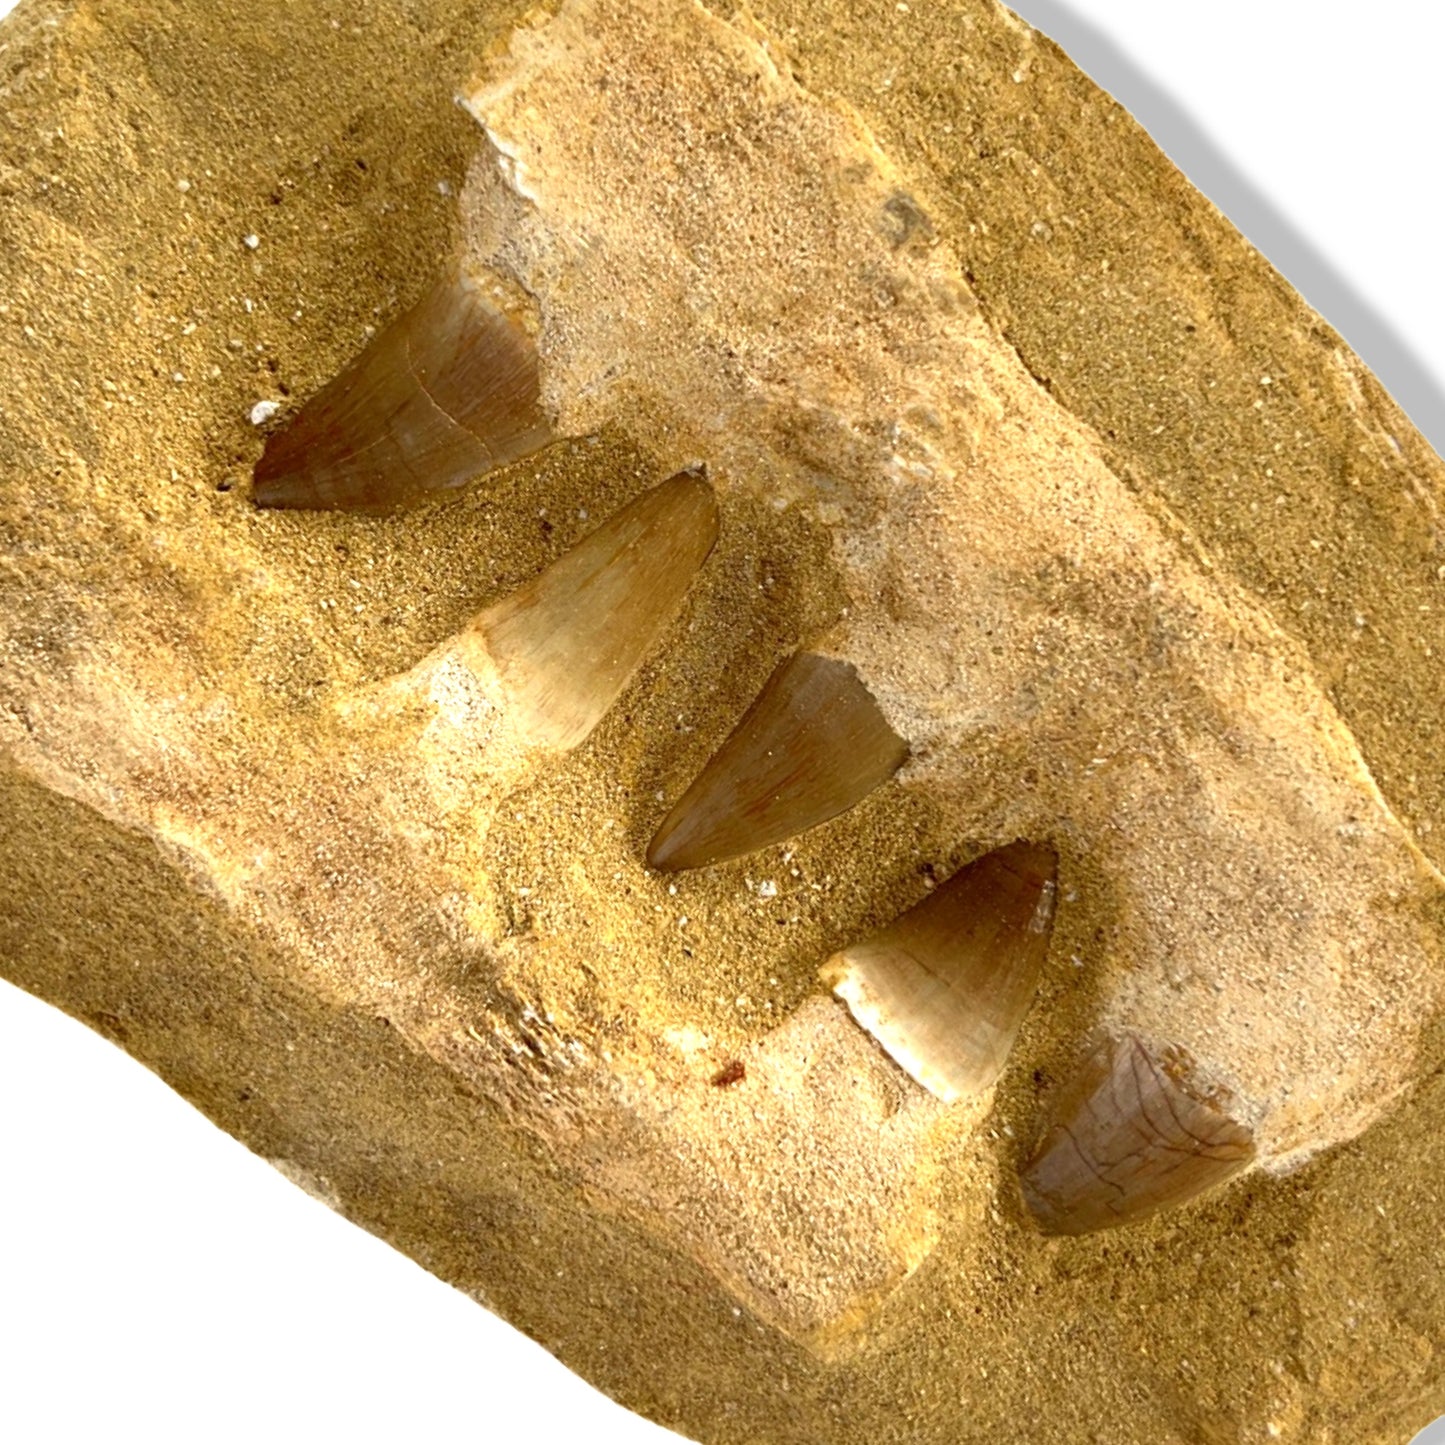 Mosasaur Moroccan Jurassic Jaw Fossil, 70 Million Years Old